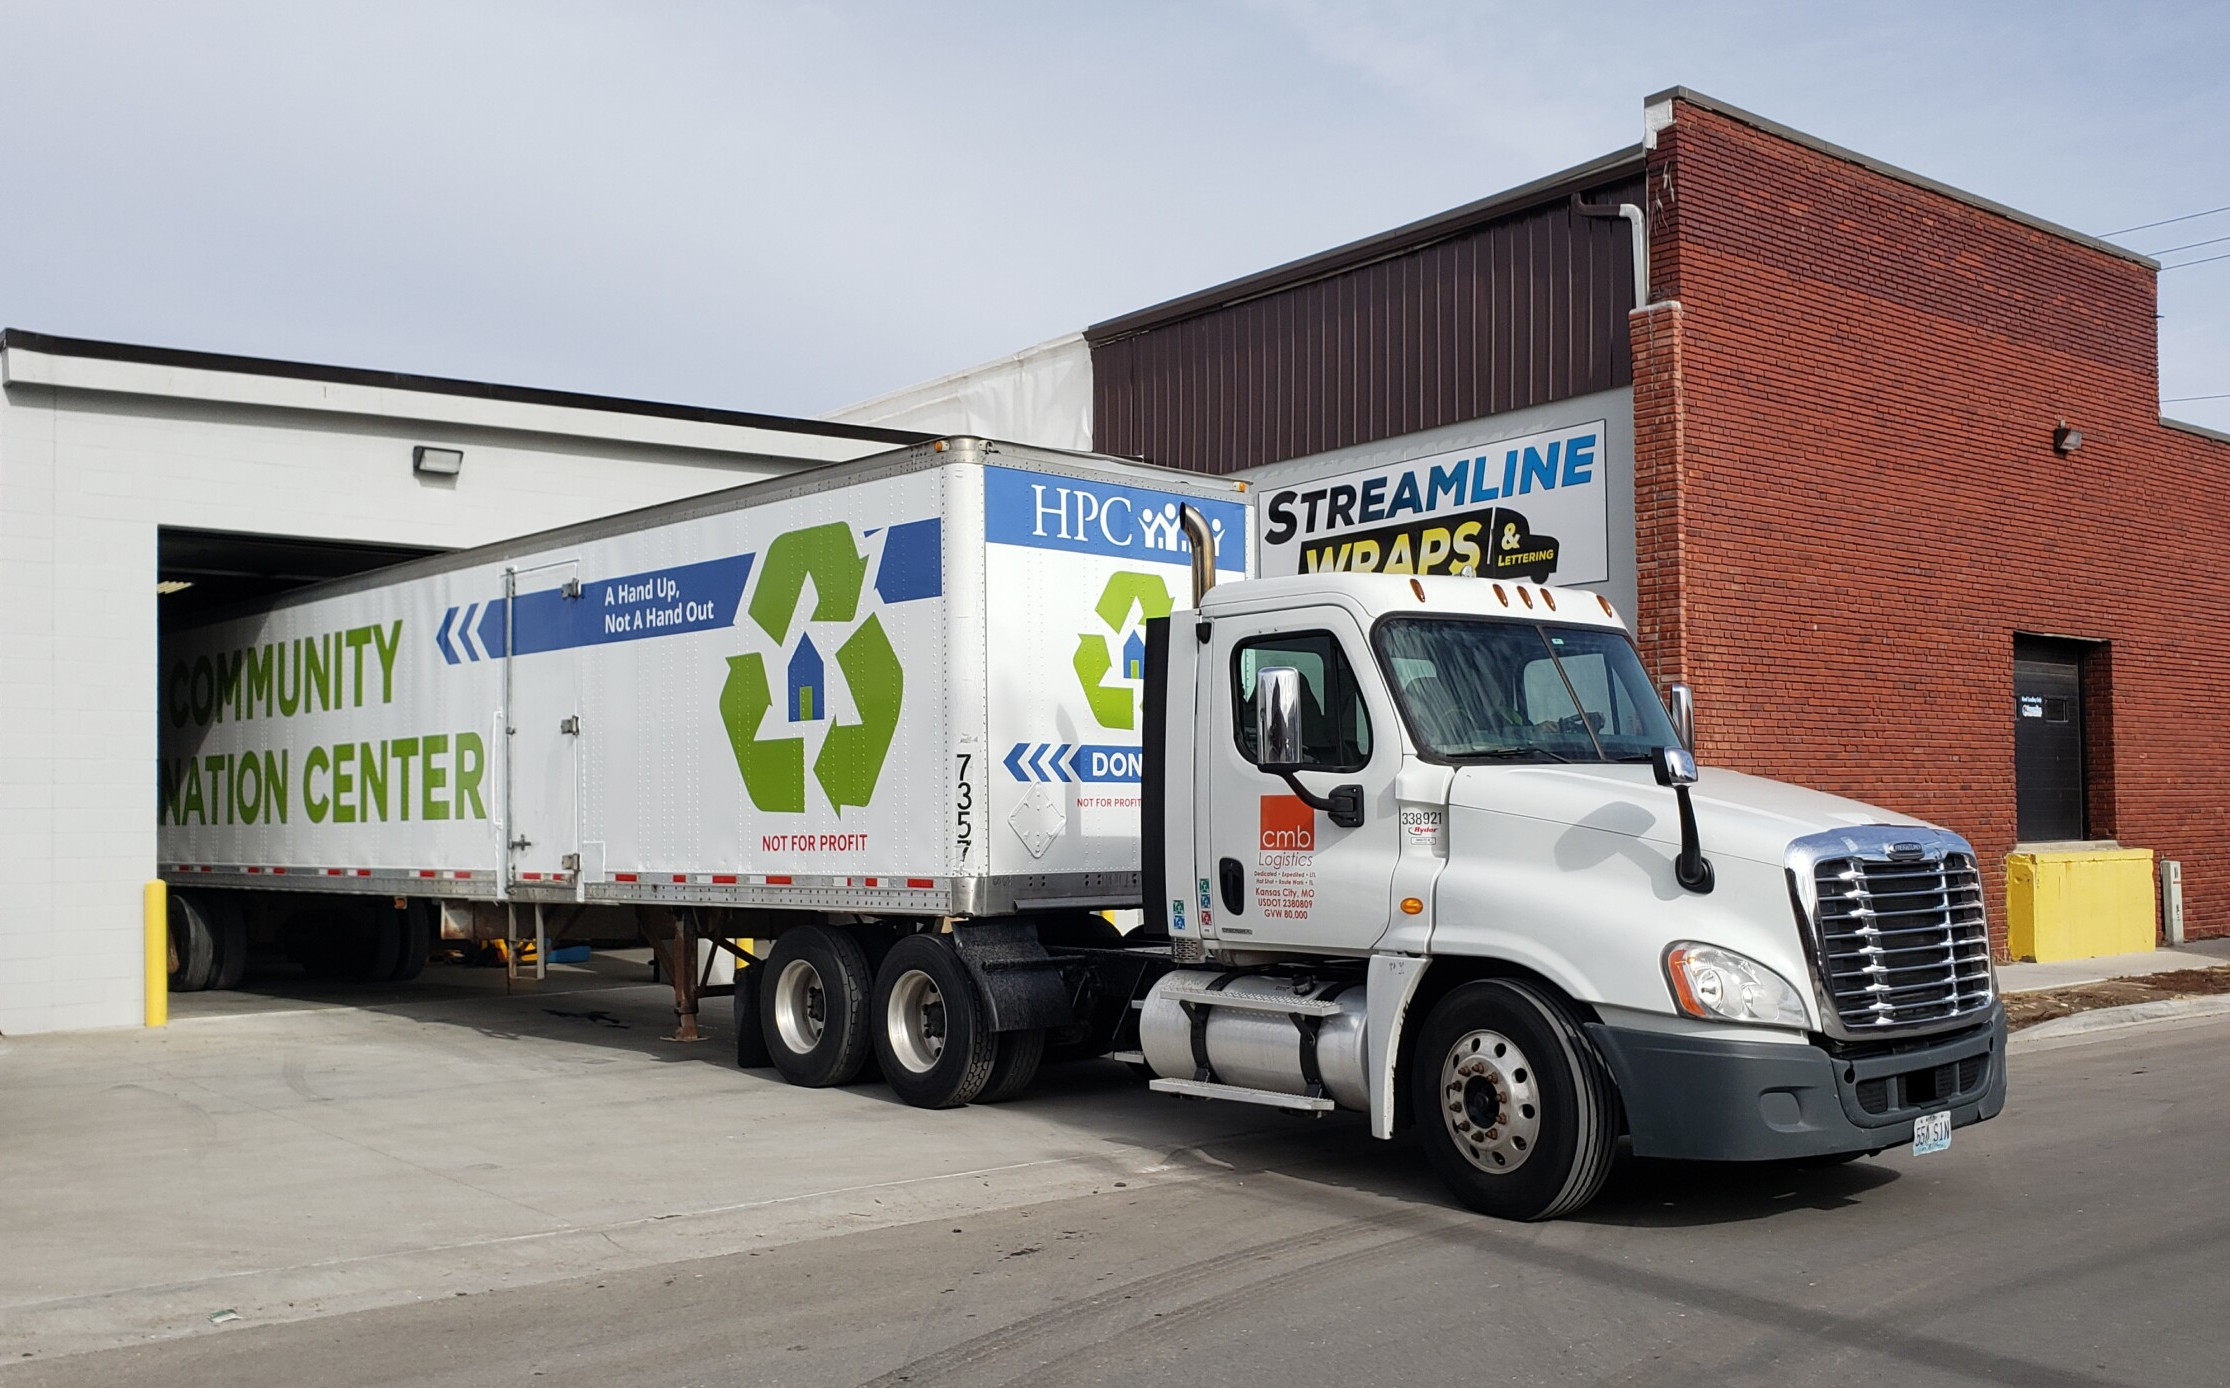 Get Experienced Service with Custom Vehicle Wraps Designed by Streamline Print and Design.